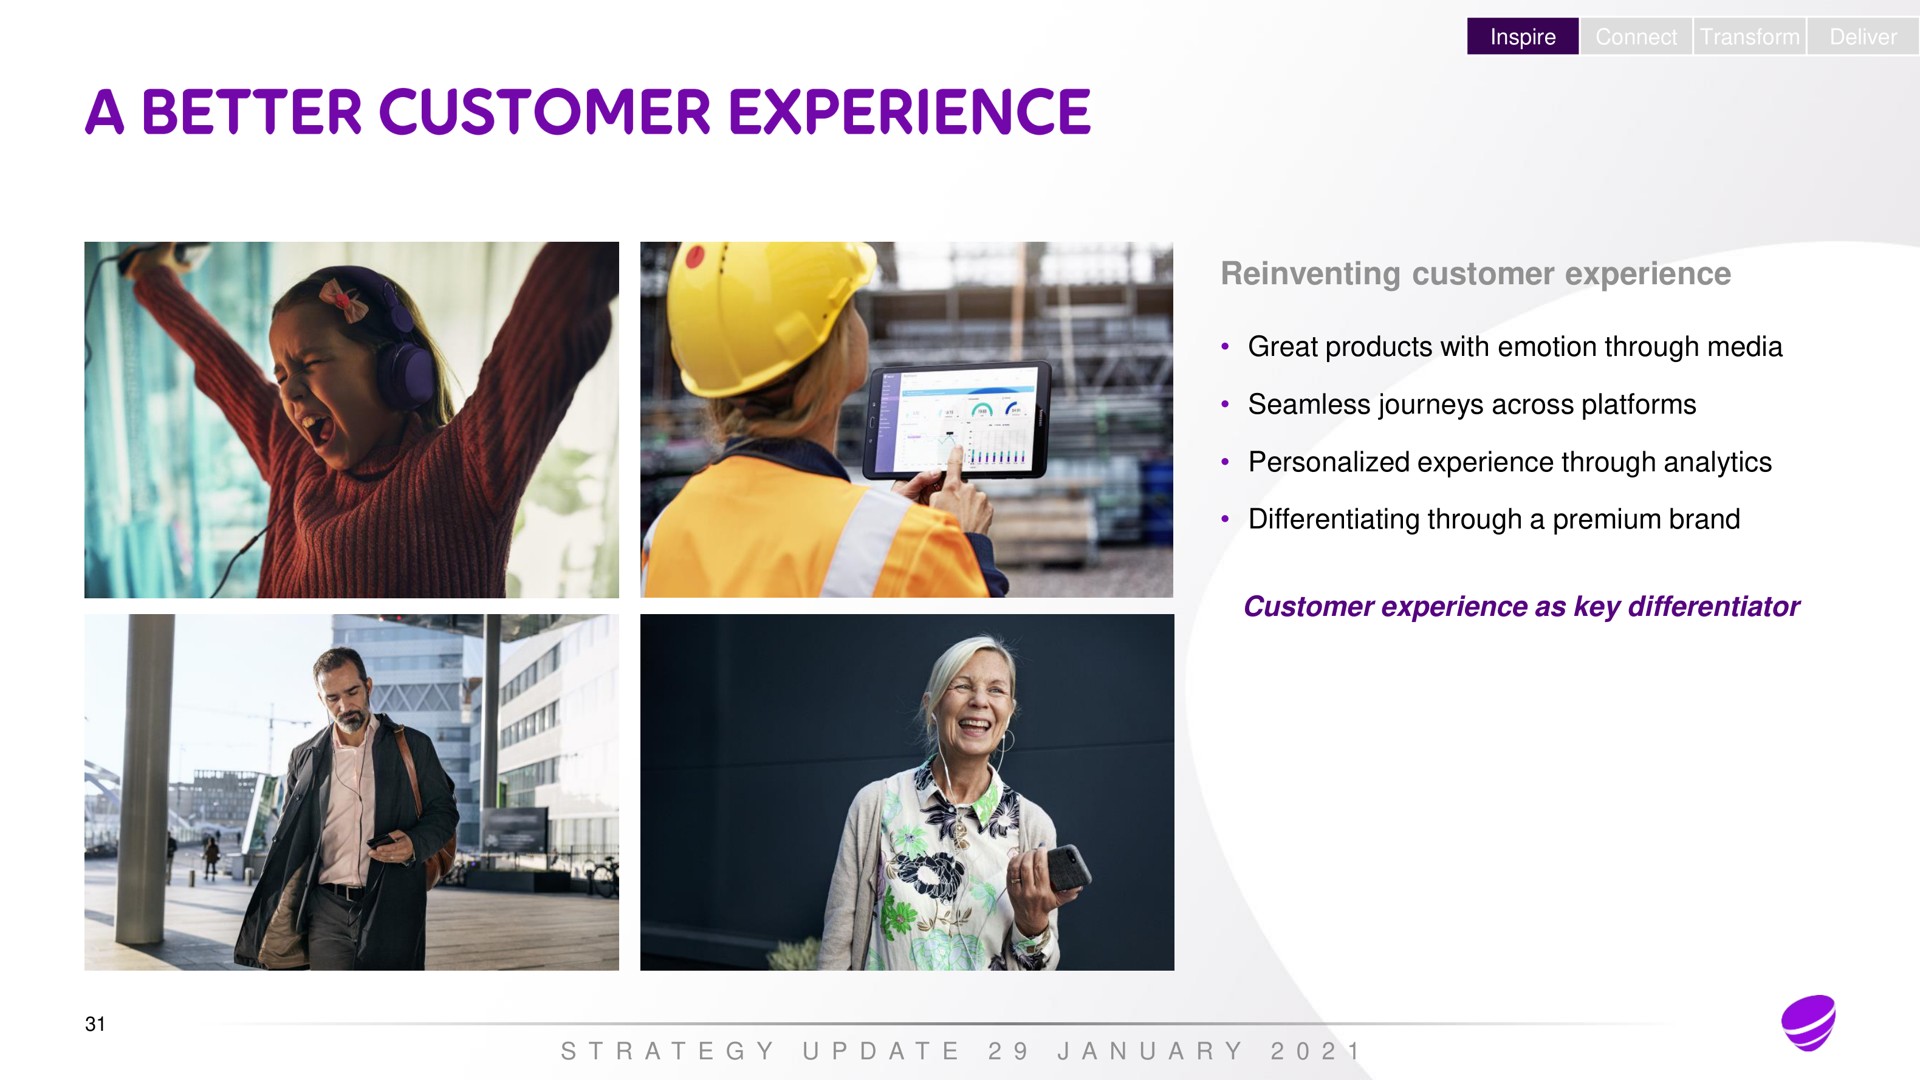 inspire connect transform deliver reinventing customer experience great products with emotion through media seamless journeys across platforms personalized experience through analytics differentiating through a premium brand customer experience as key differentiator a a a a better | Telia Company